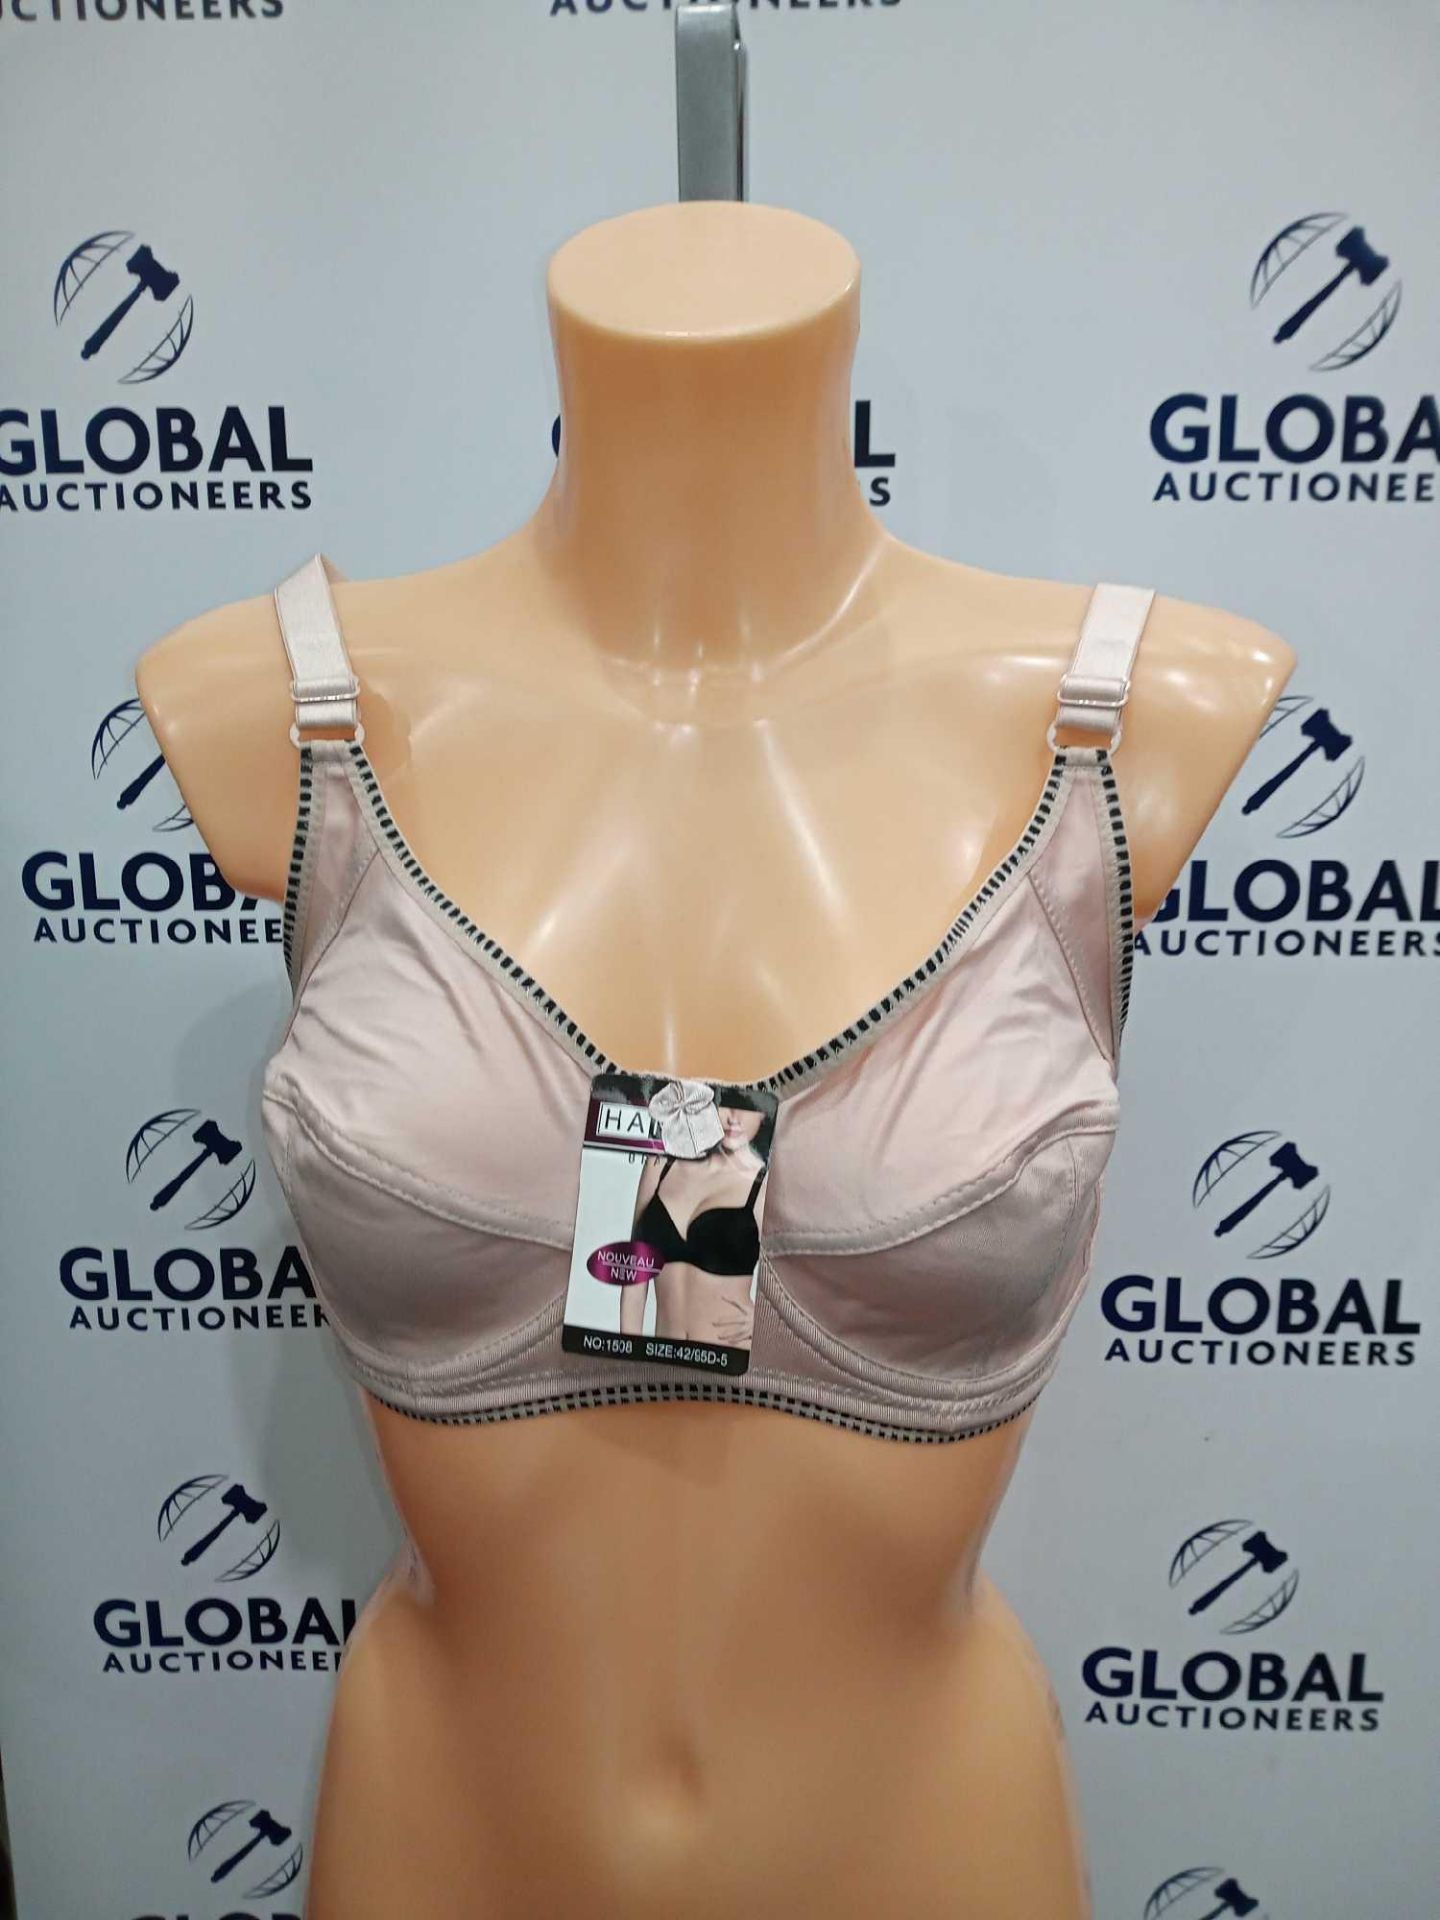 RRP £540 Lot To Contain 3 Brand New Packs Of 12 Hana Body Shaping Bras In Nude Colour